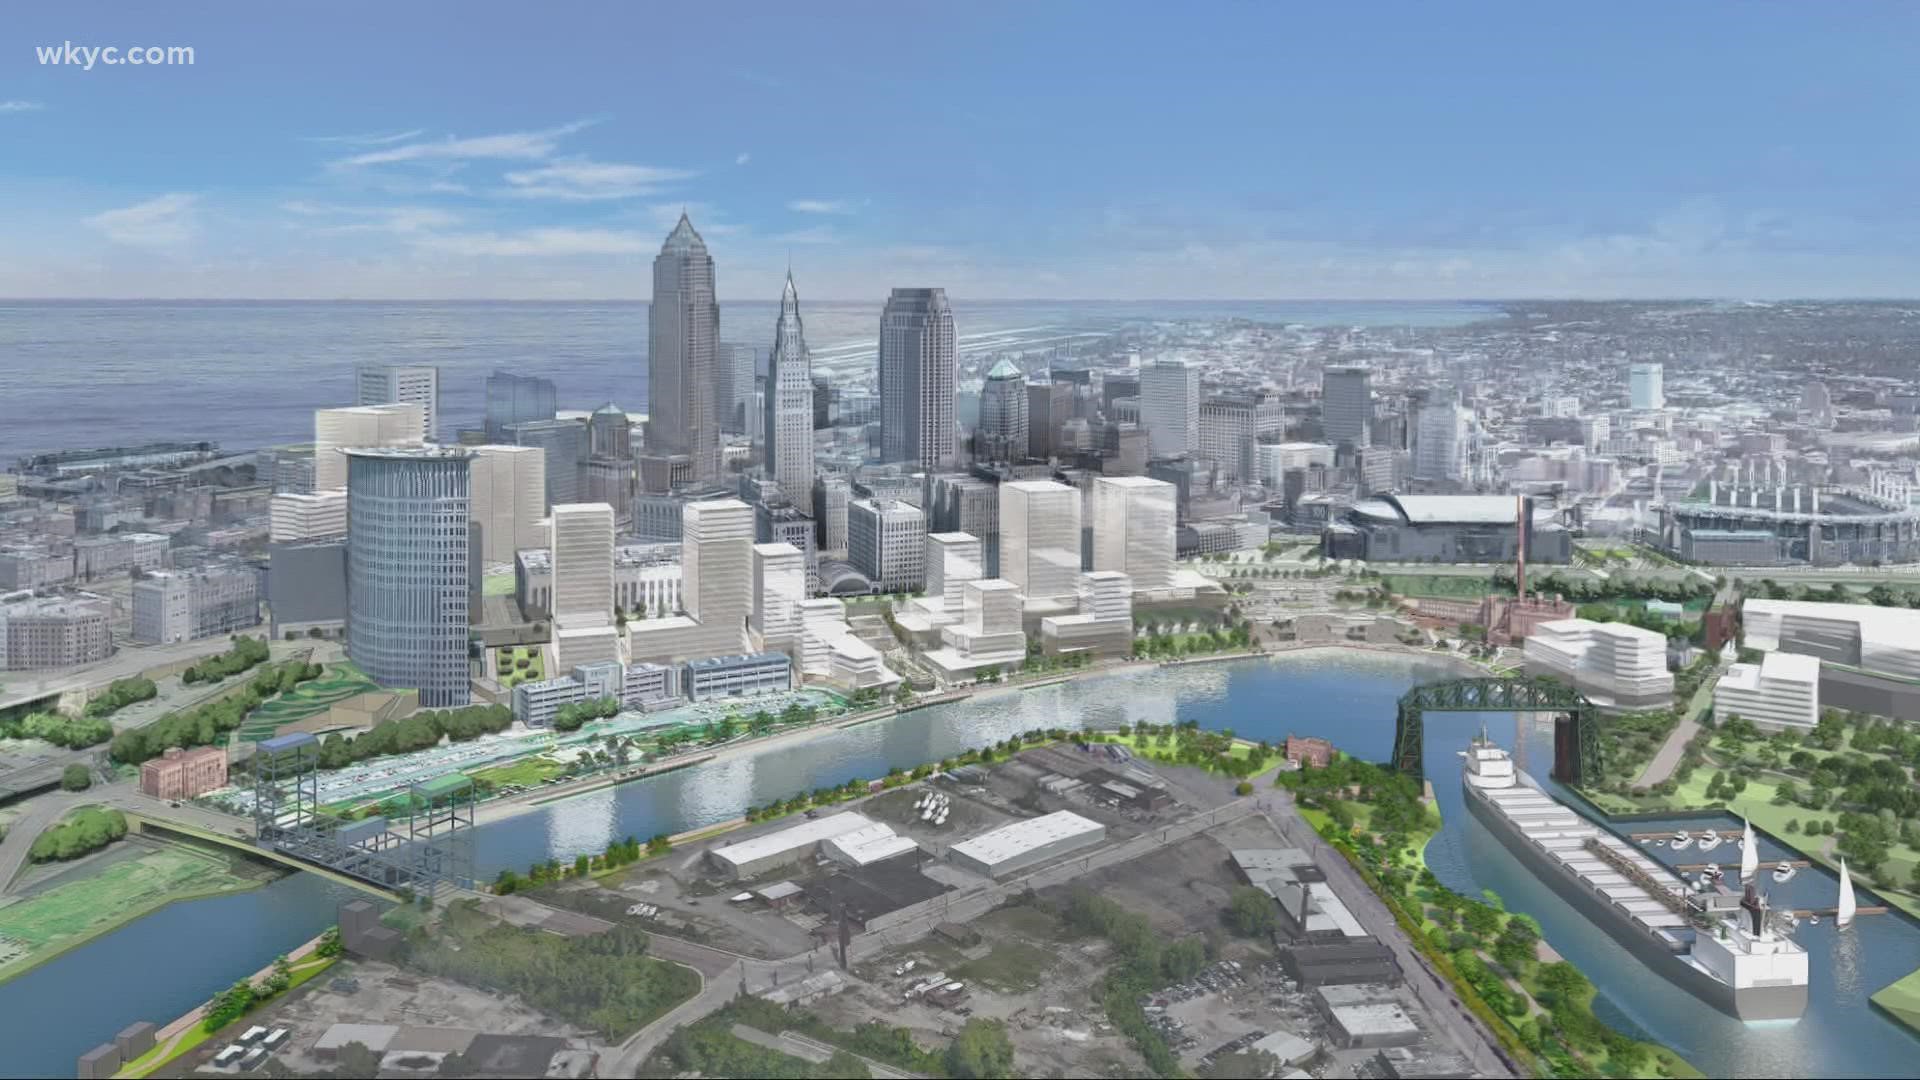 New plans are in the works to revitalize and expand downtown Cleveland.